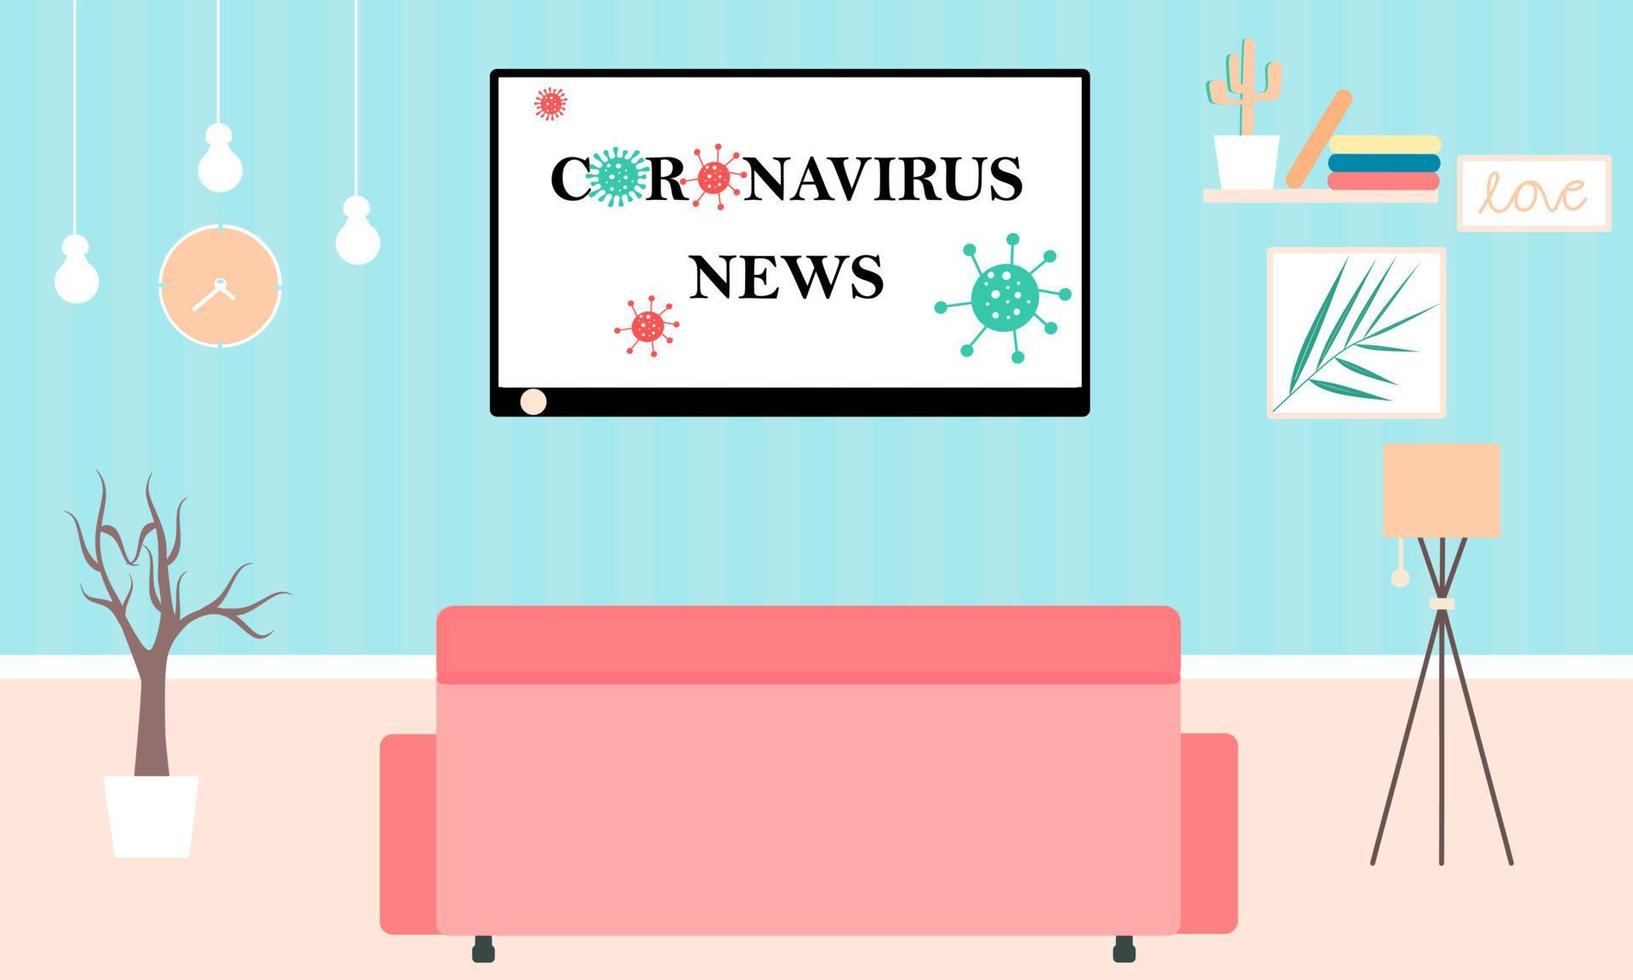 Illustrations depicting news on tv at home. Stay at home and catching up on news about coronavirus. Monitors the situation in the world. Isolation at home. Colorful vector illustration. Landing page.